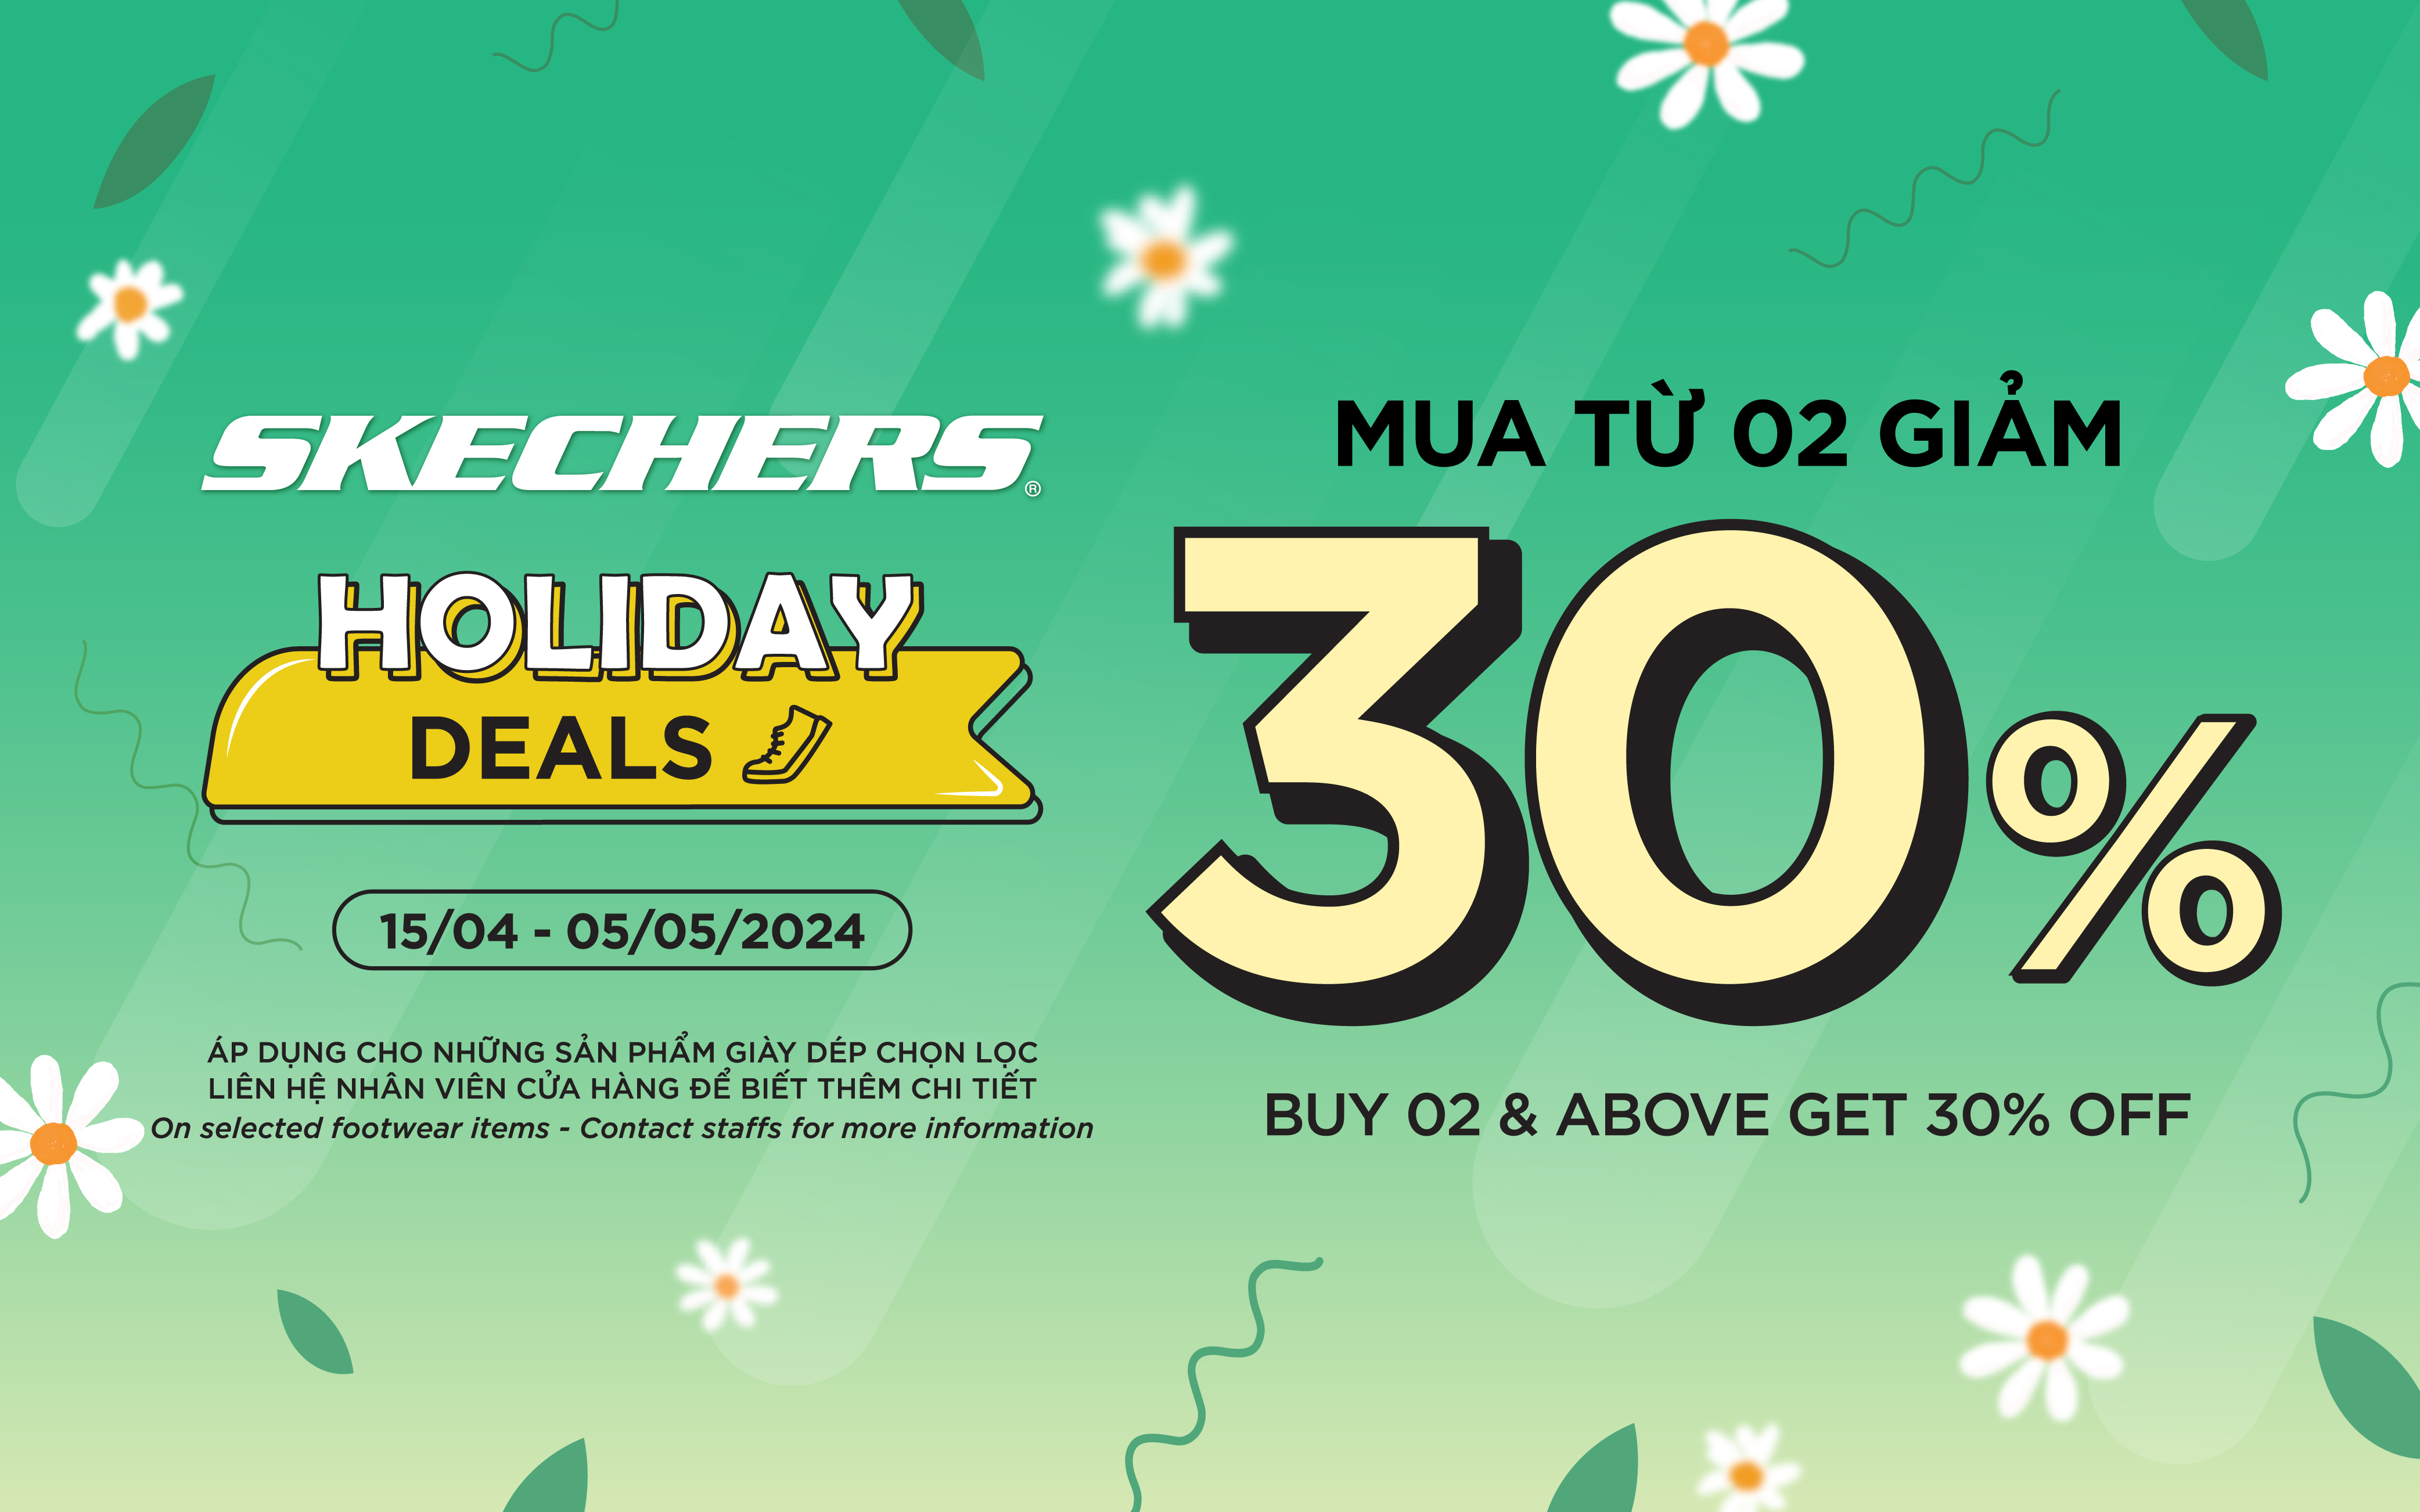 SKECHERS HOLIDAY DEALS PROMOTIONS